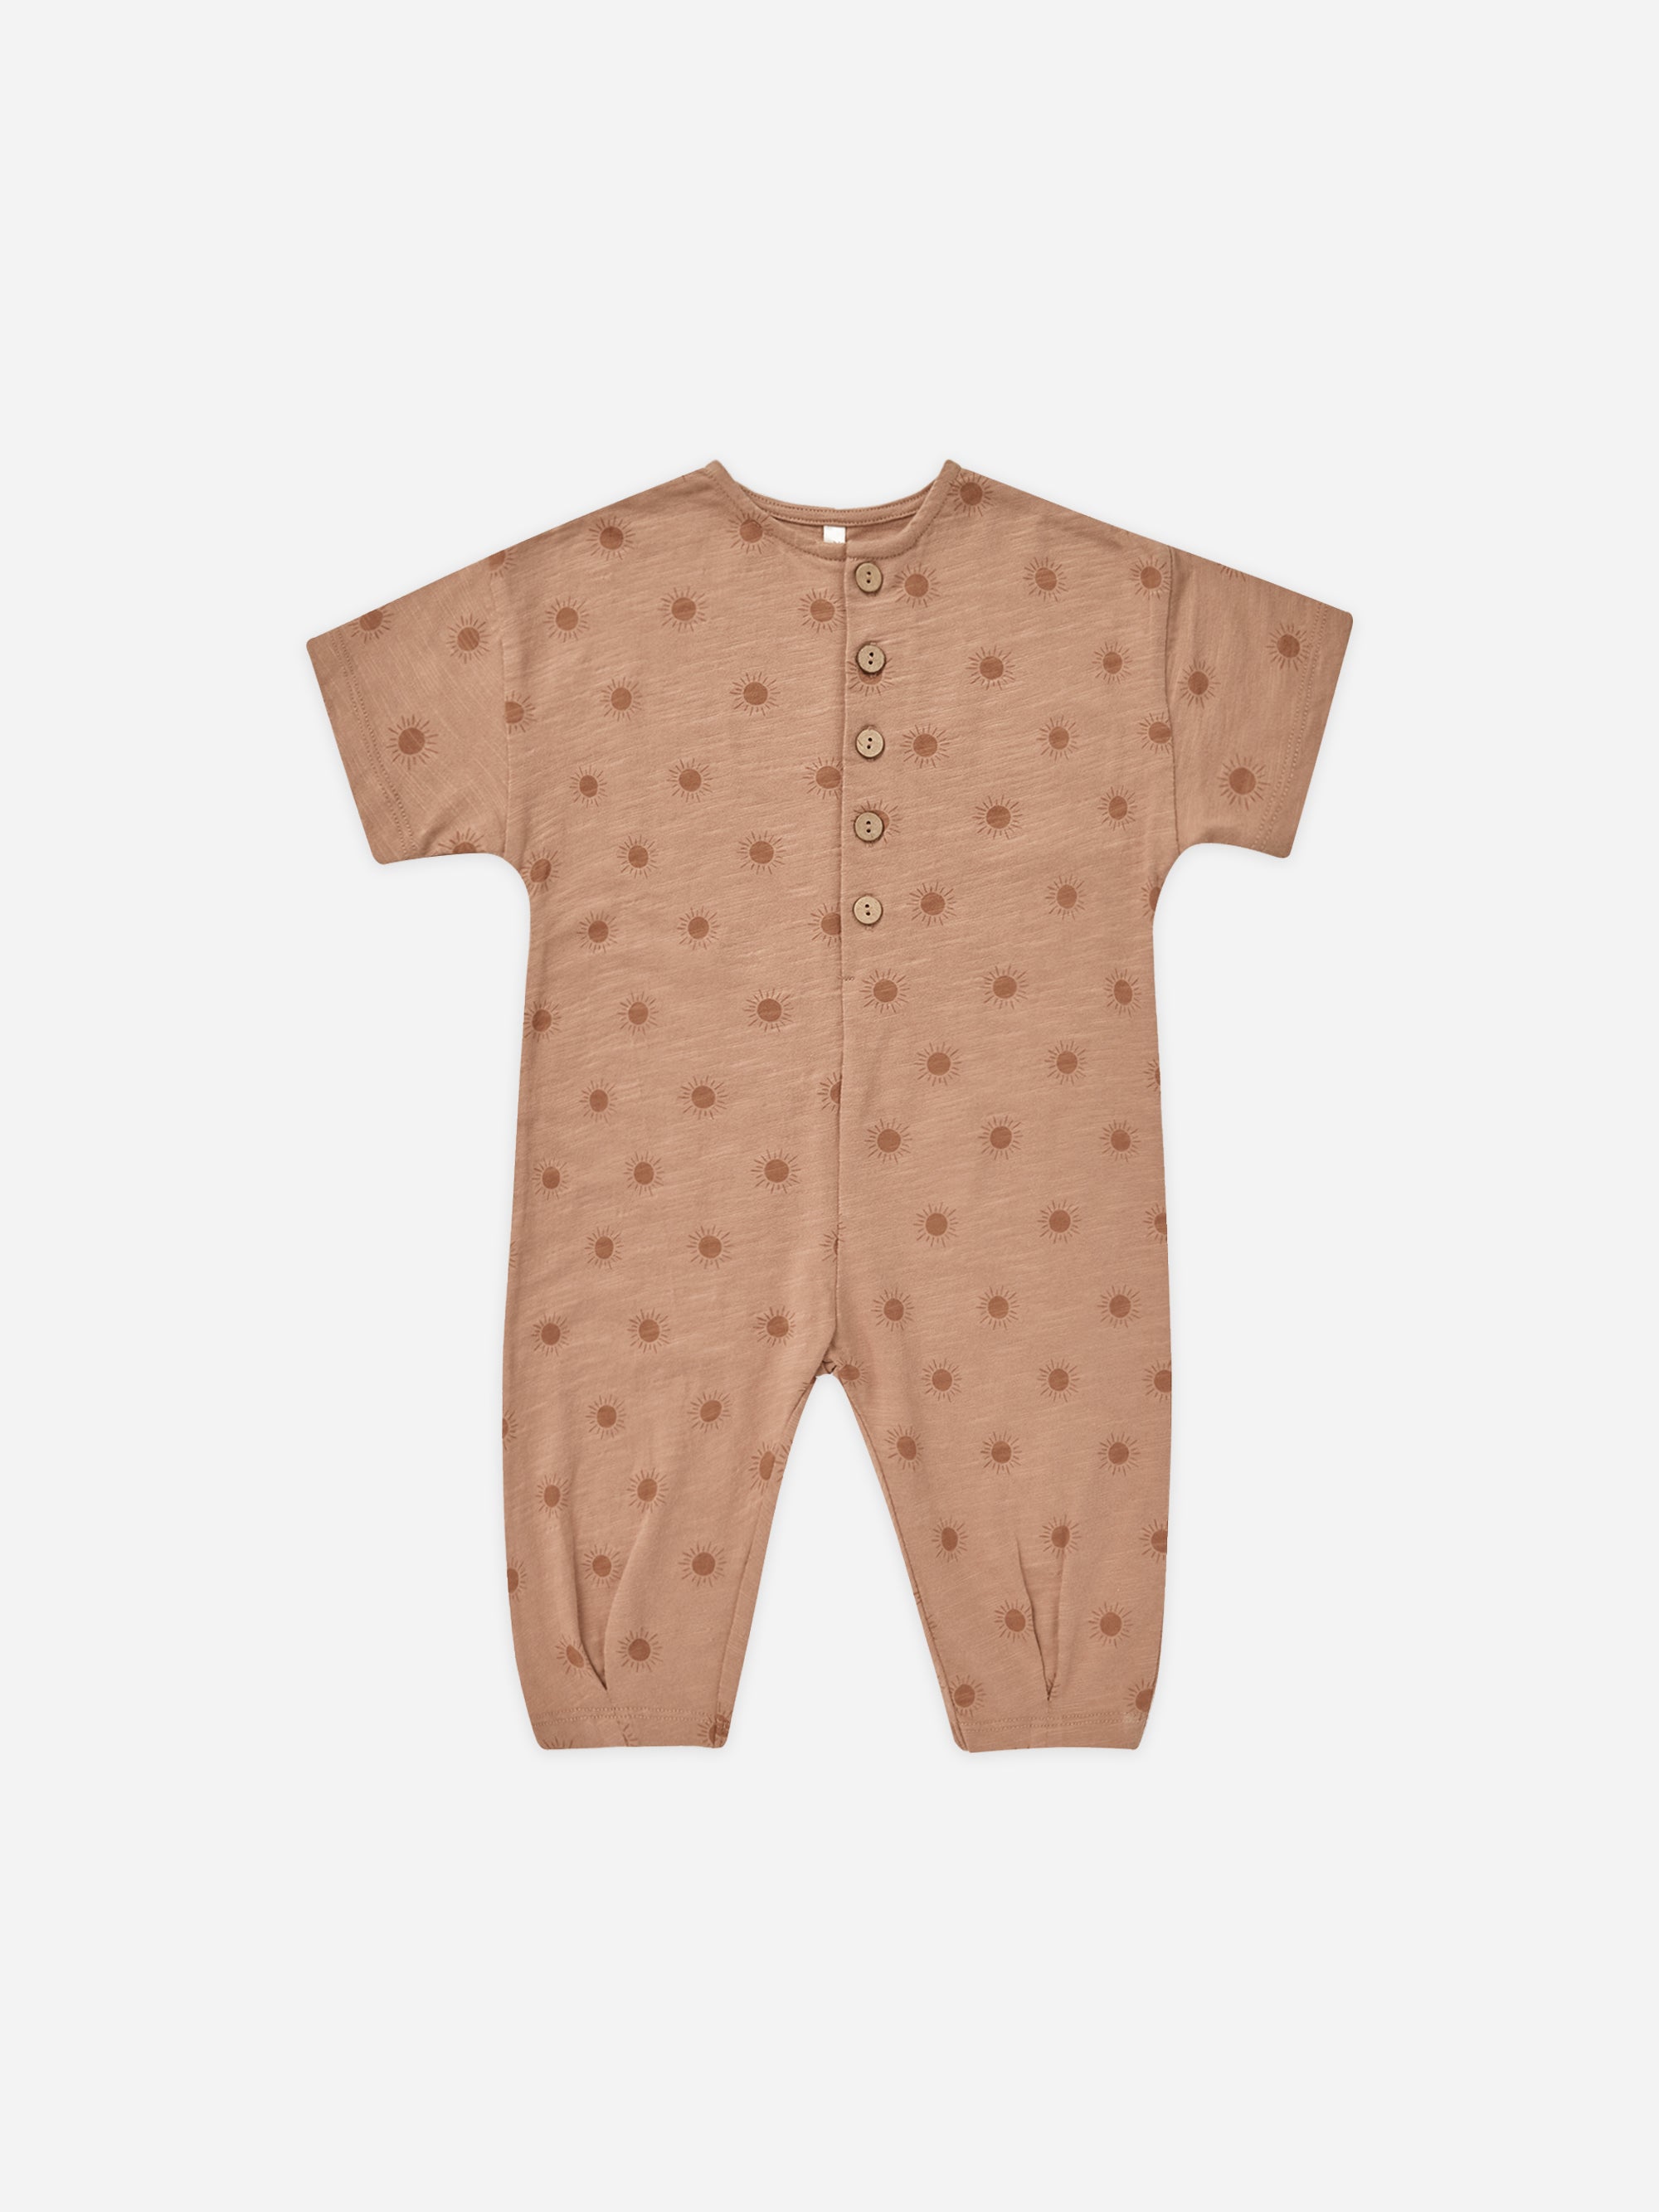 Hayes Jumpsuit || Suns - Rylee + Cru | Kids Clothes | Trendy Baby Clothes | Modern Infant Outfits |